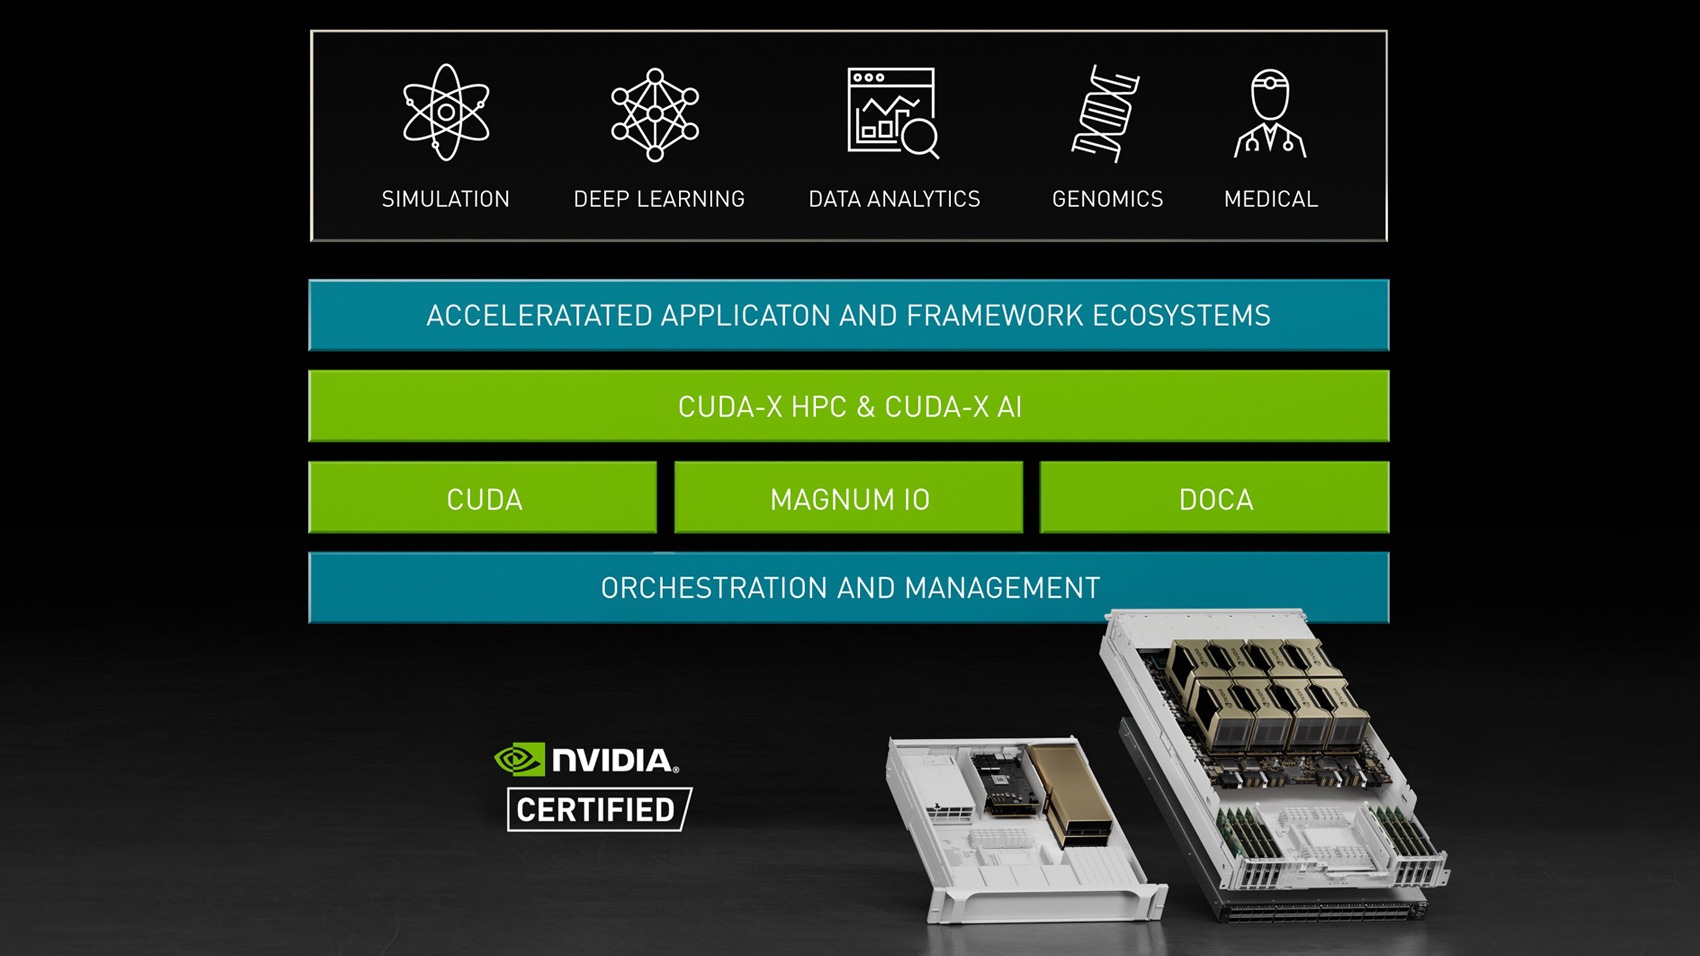 NVIDIA Grace CPU Offers Up To 2X Performance Versus AMD Genoa & Intel  Sapphire Rapids x86 Chips At Same Power